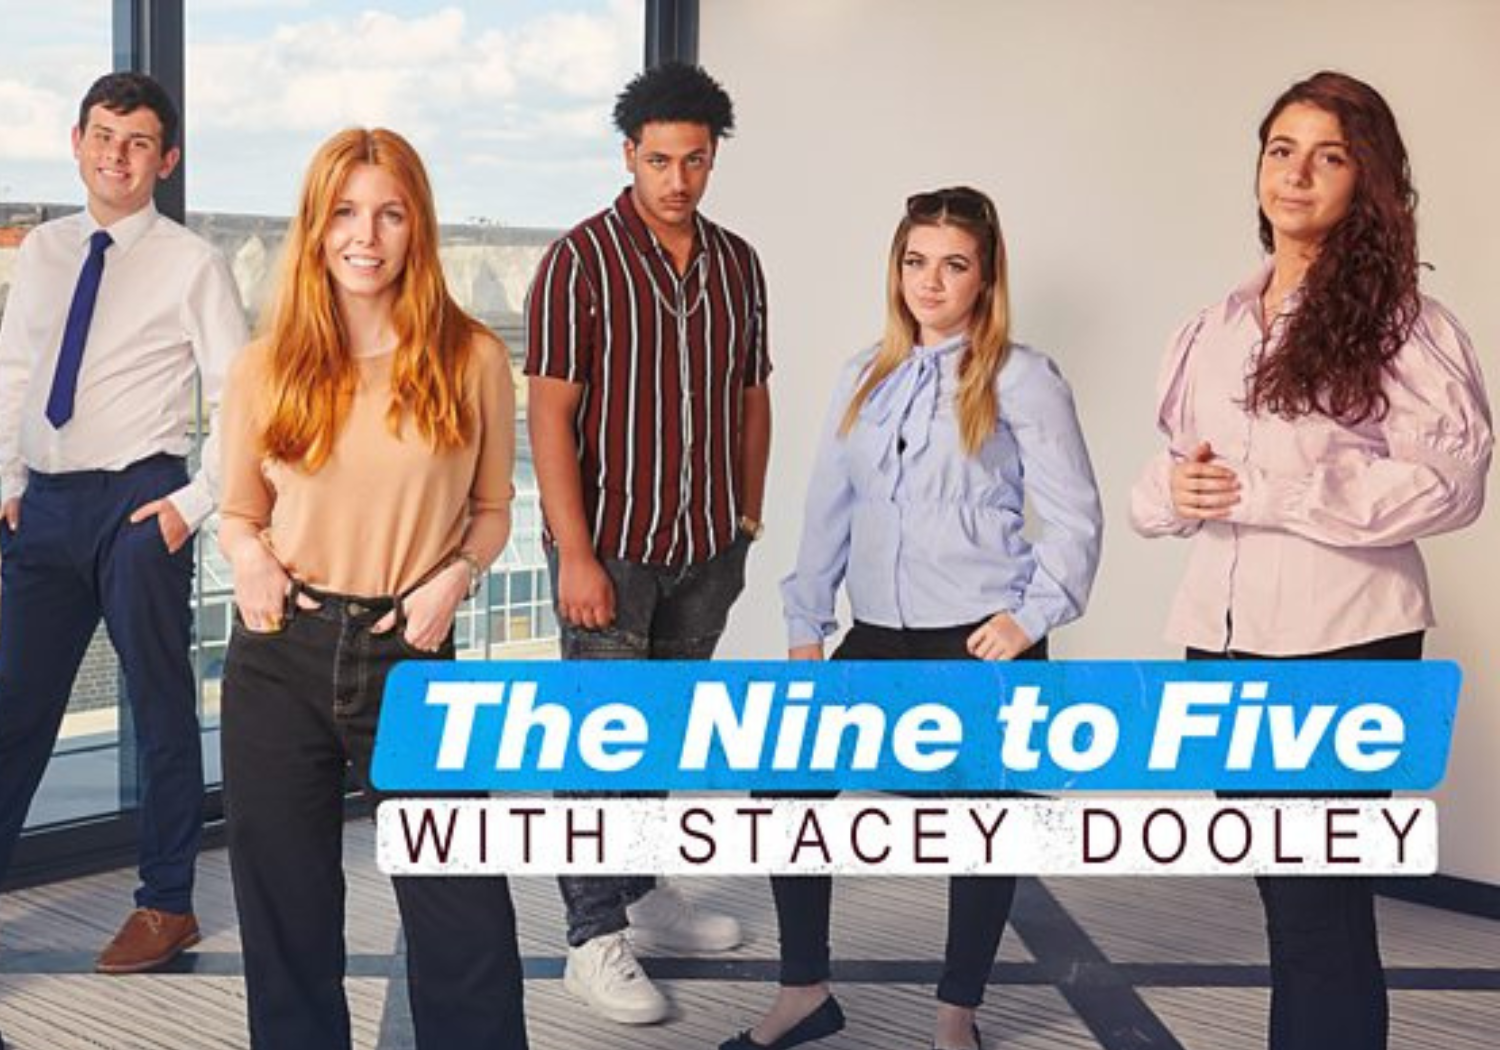 School-age teenagers with Stacey Dooley